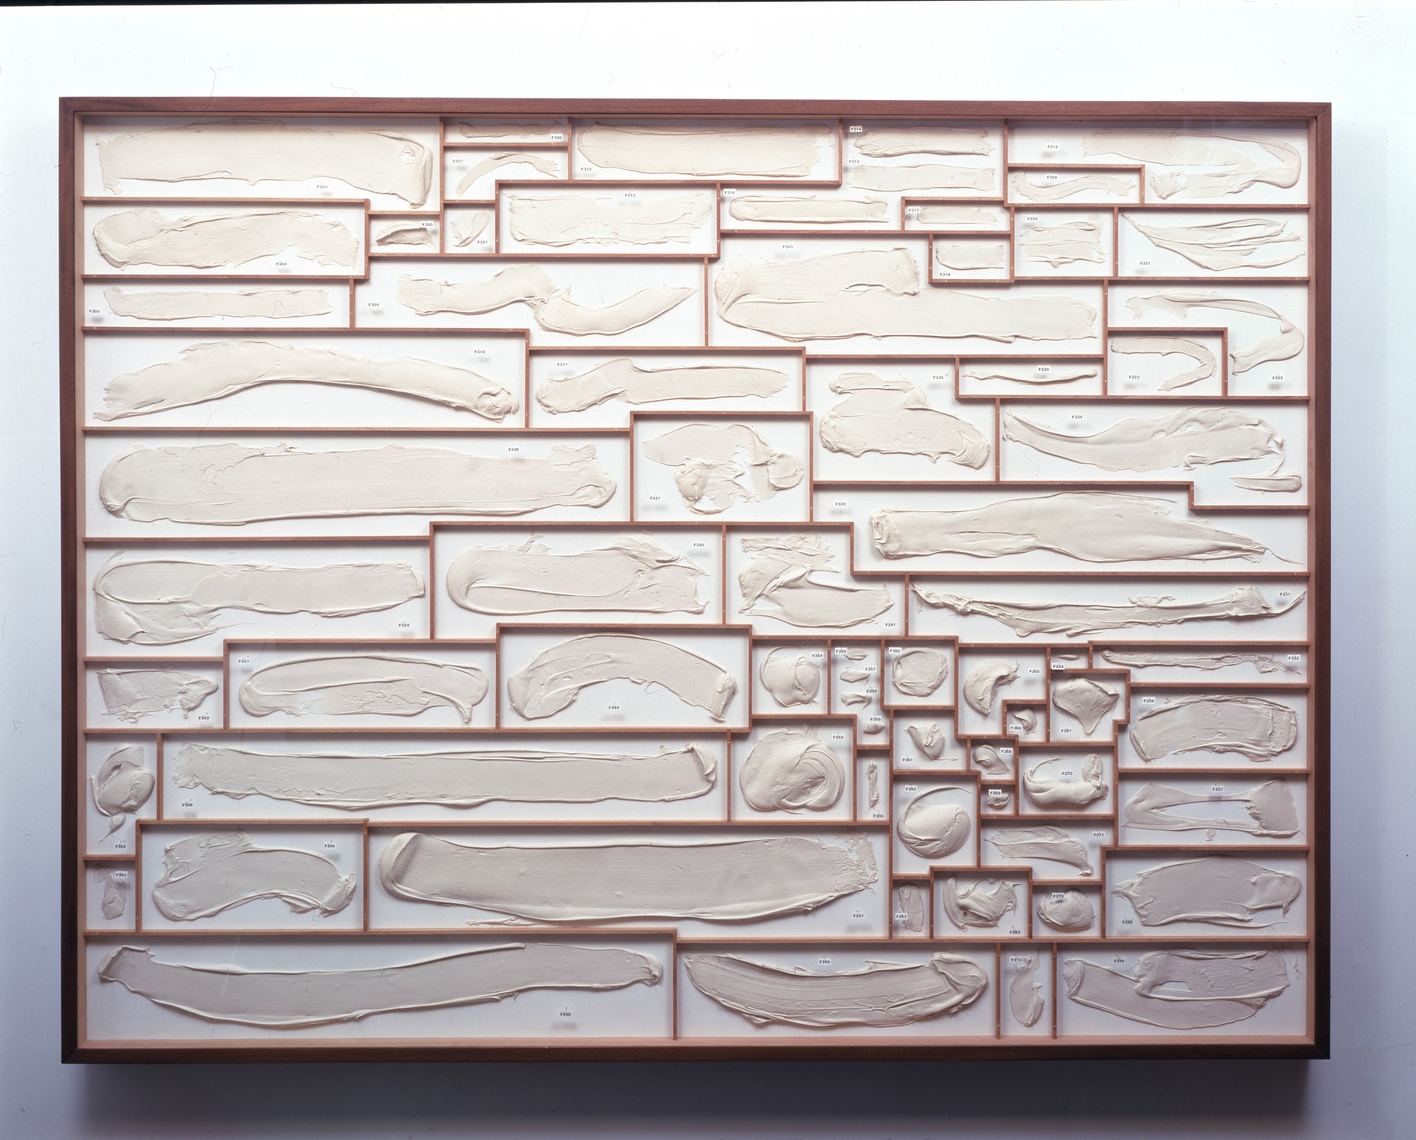  Pigeon Holes, 1997, polymer, mahogany, alkyd paint, insect pins, and plexiglas, 72 x 96 x 6 inches 